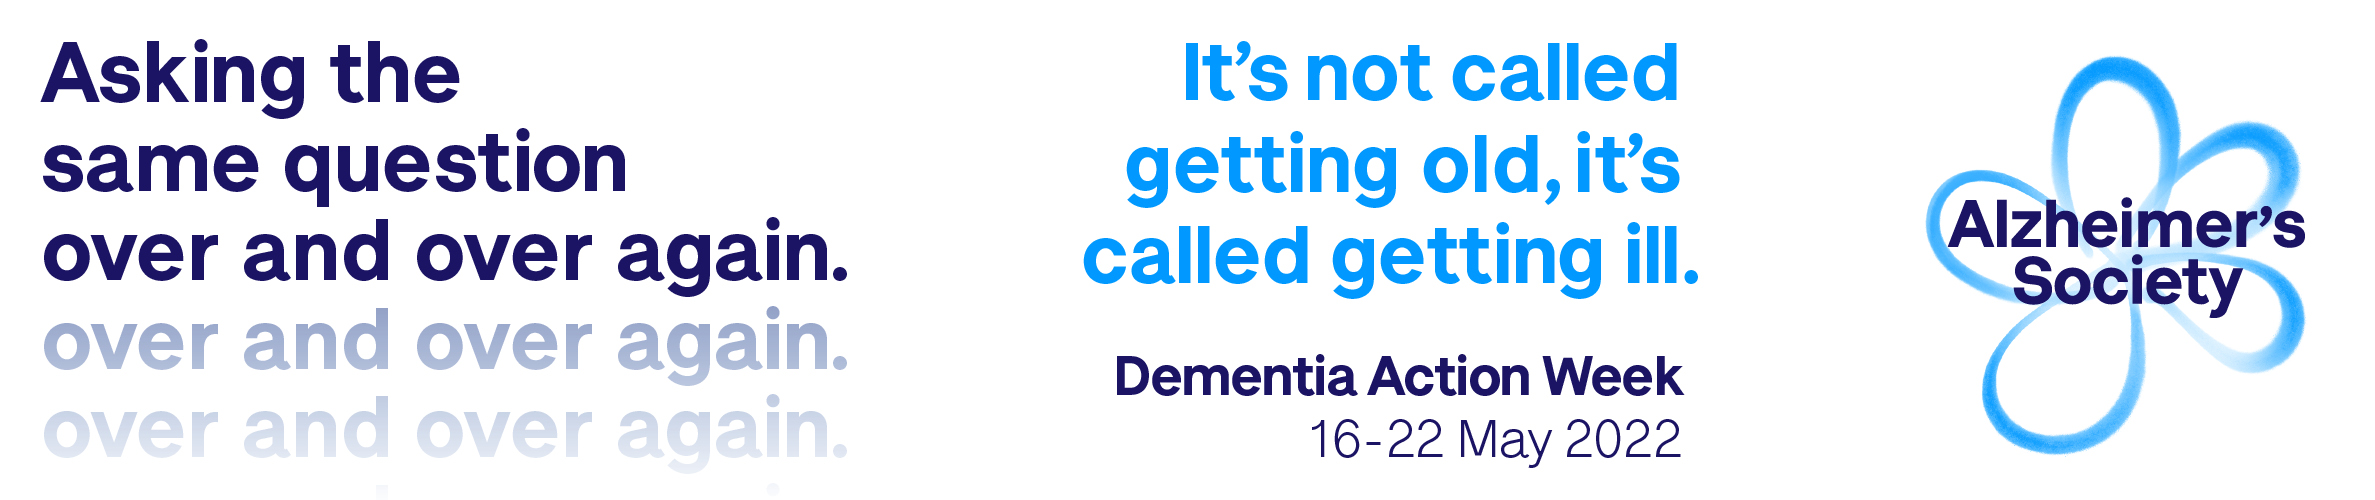 Graphic for Dementia Action Week - It's not called getting old, it's called getting ill.